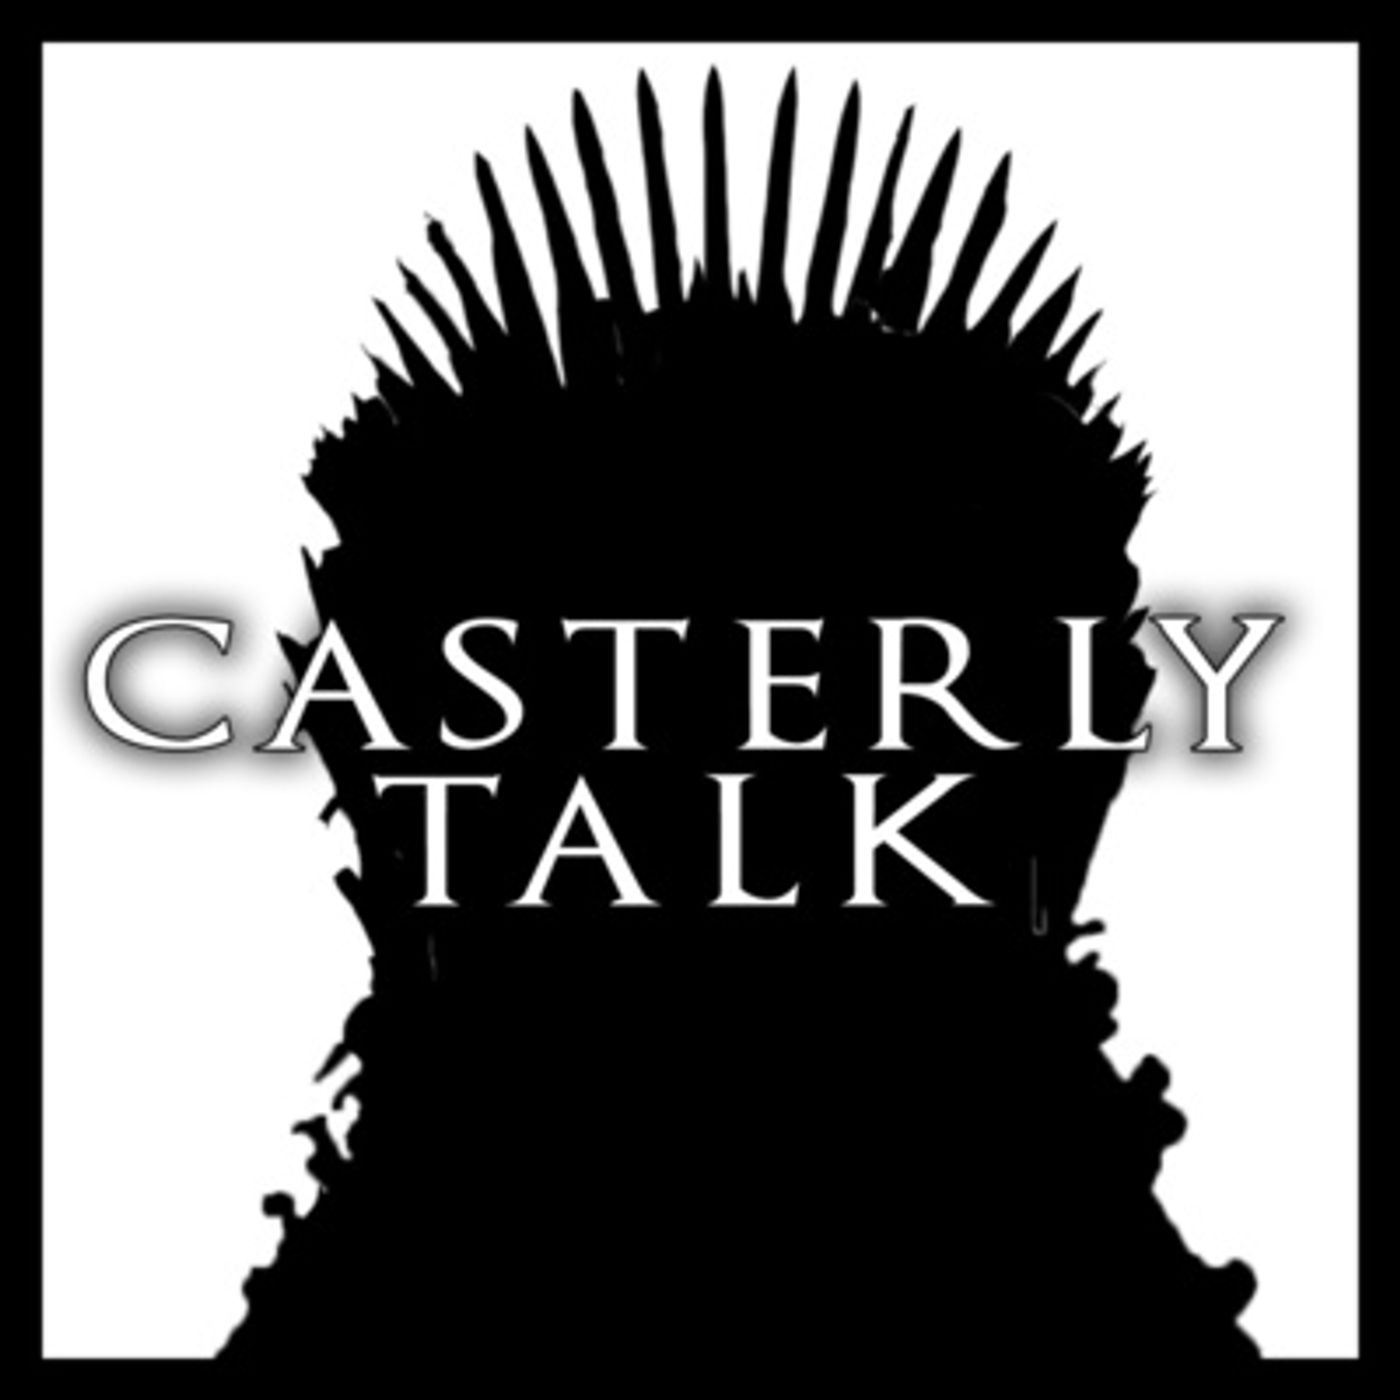 THE WHY OF RED WEDDING - Game of Thrones Rewatch - Casterly Talk EP 109